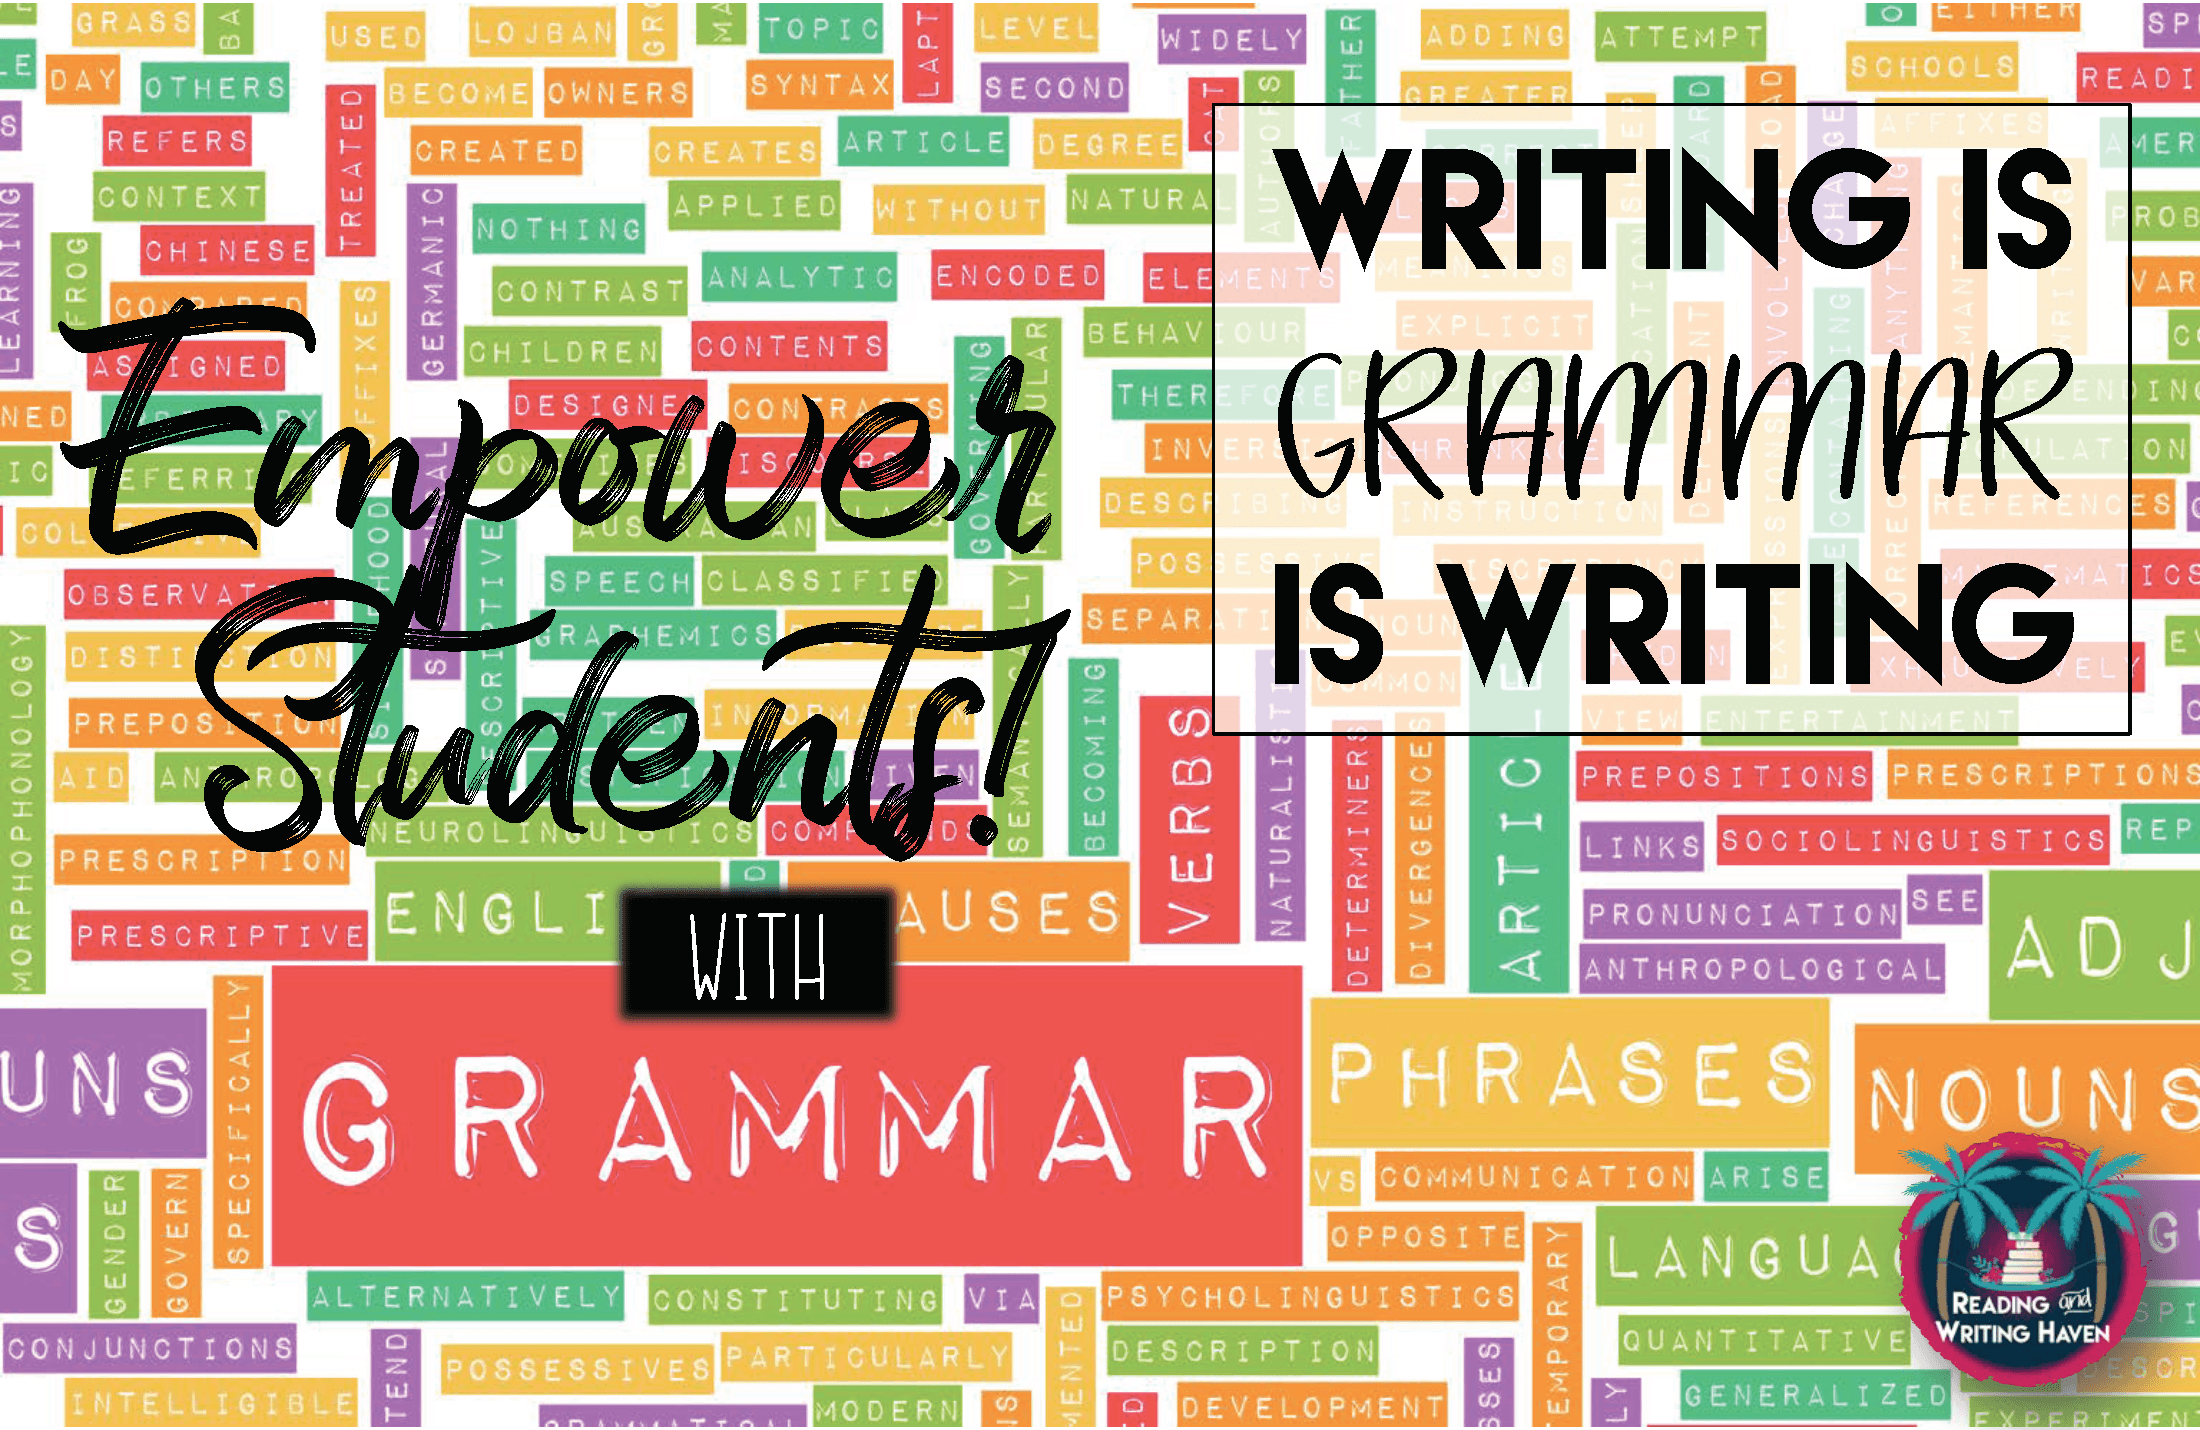 Three Grammar and Writing Lessons that Empower Student Authors